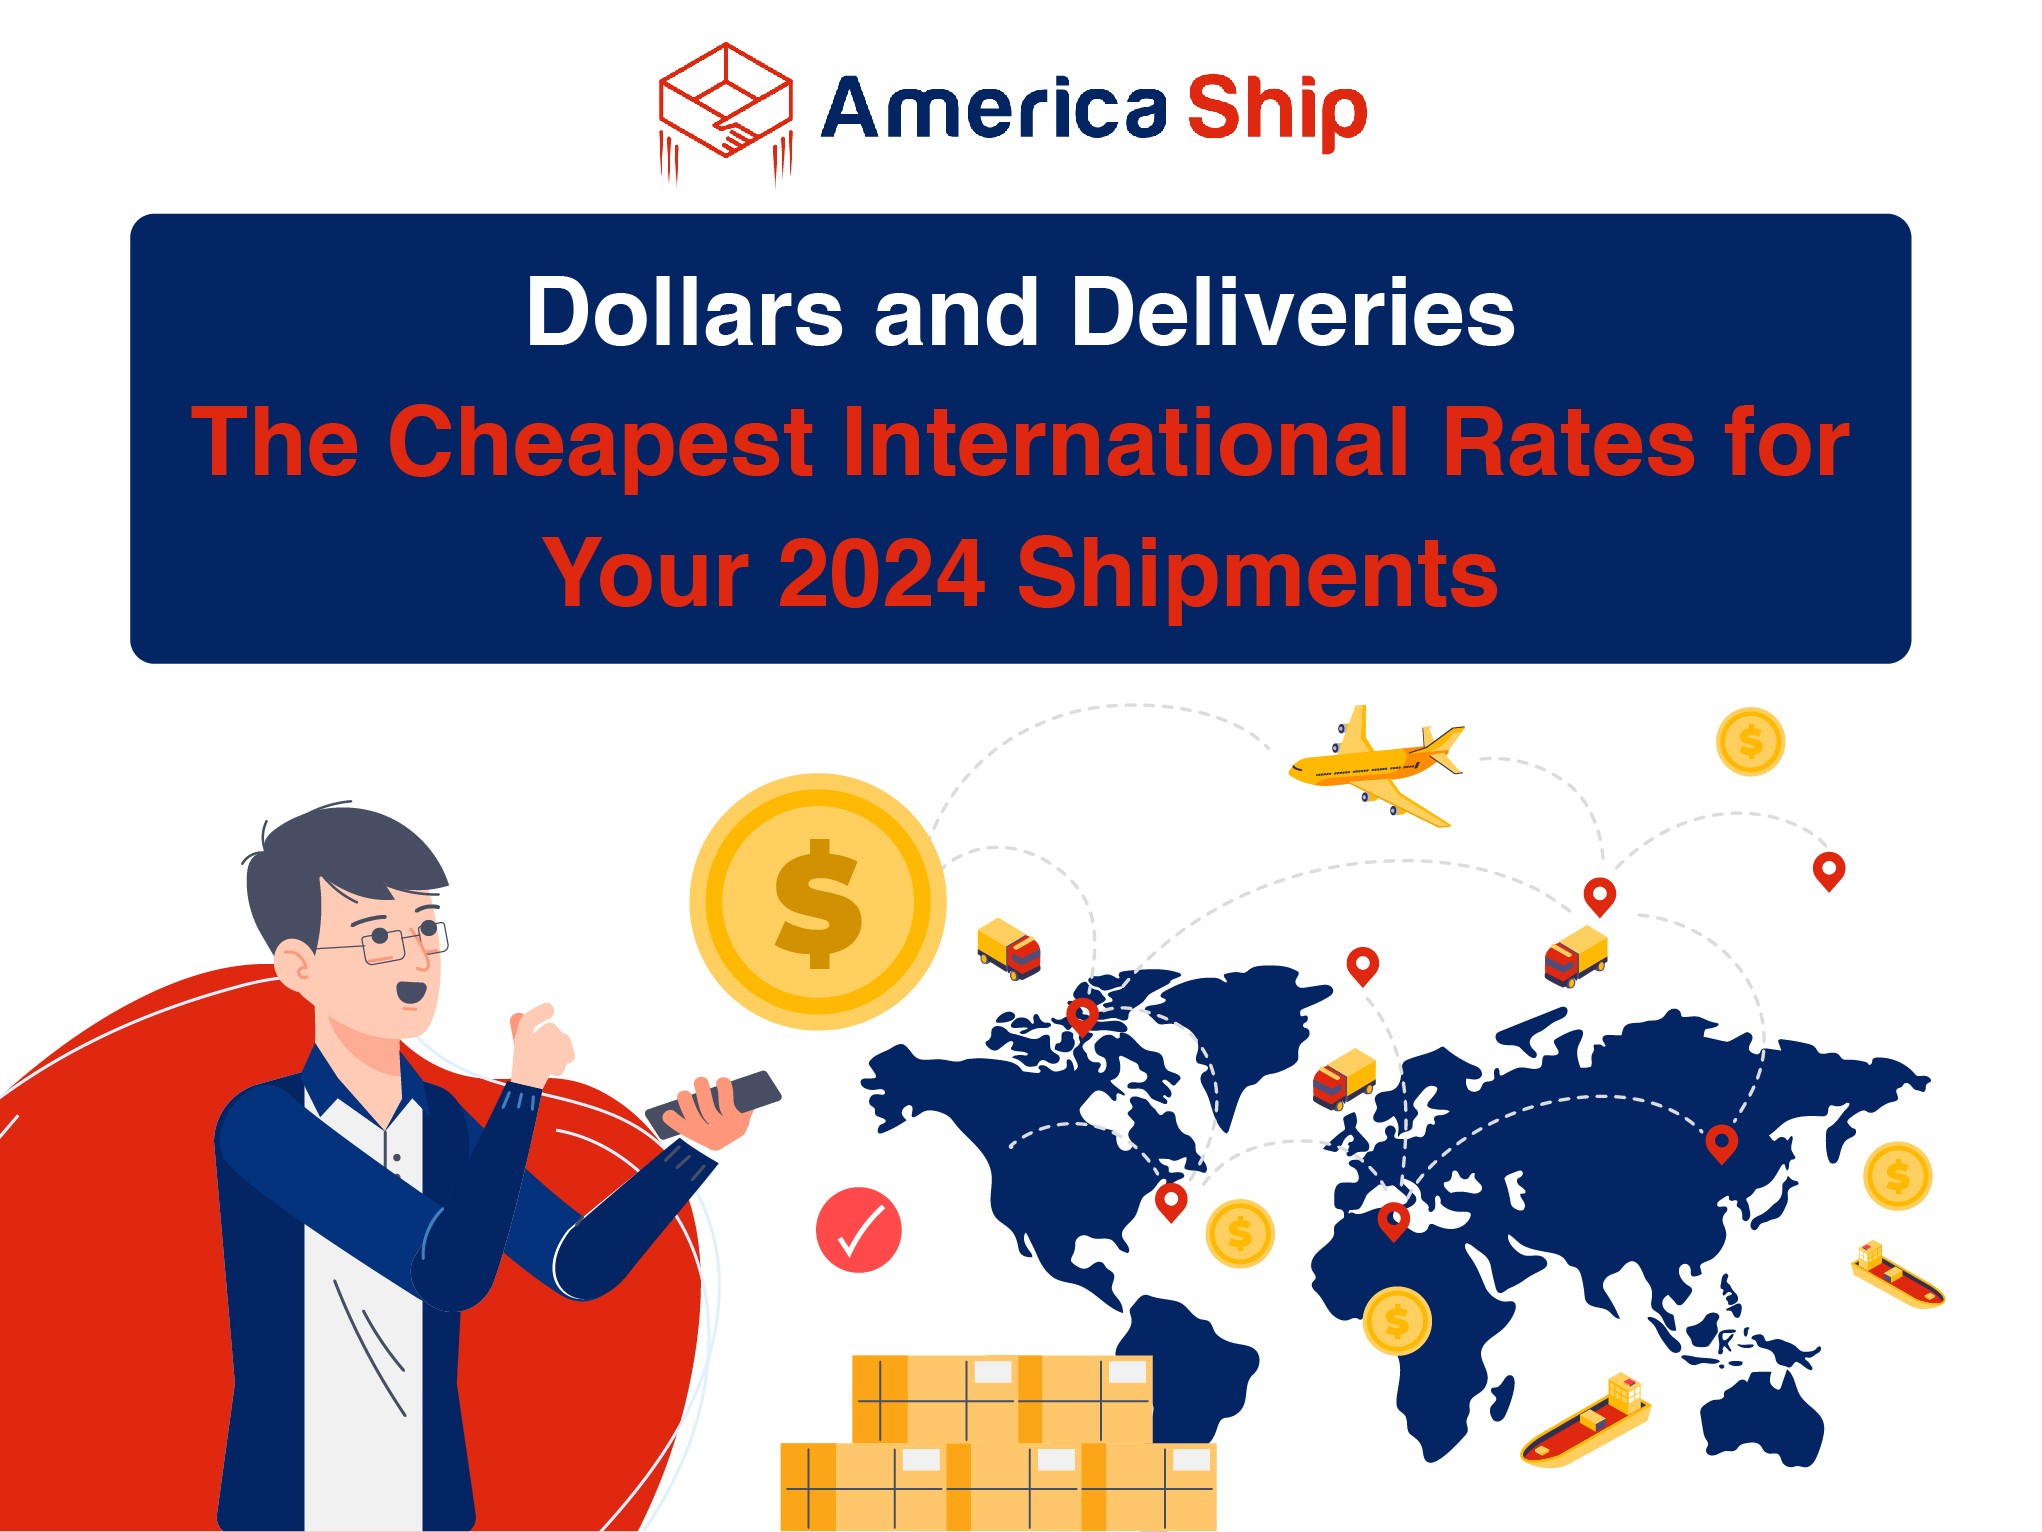 Dollars and Deliveries: The Cheapest International Rates for Your 2024 Shipments